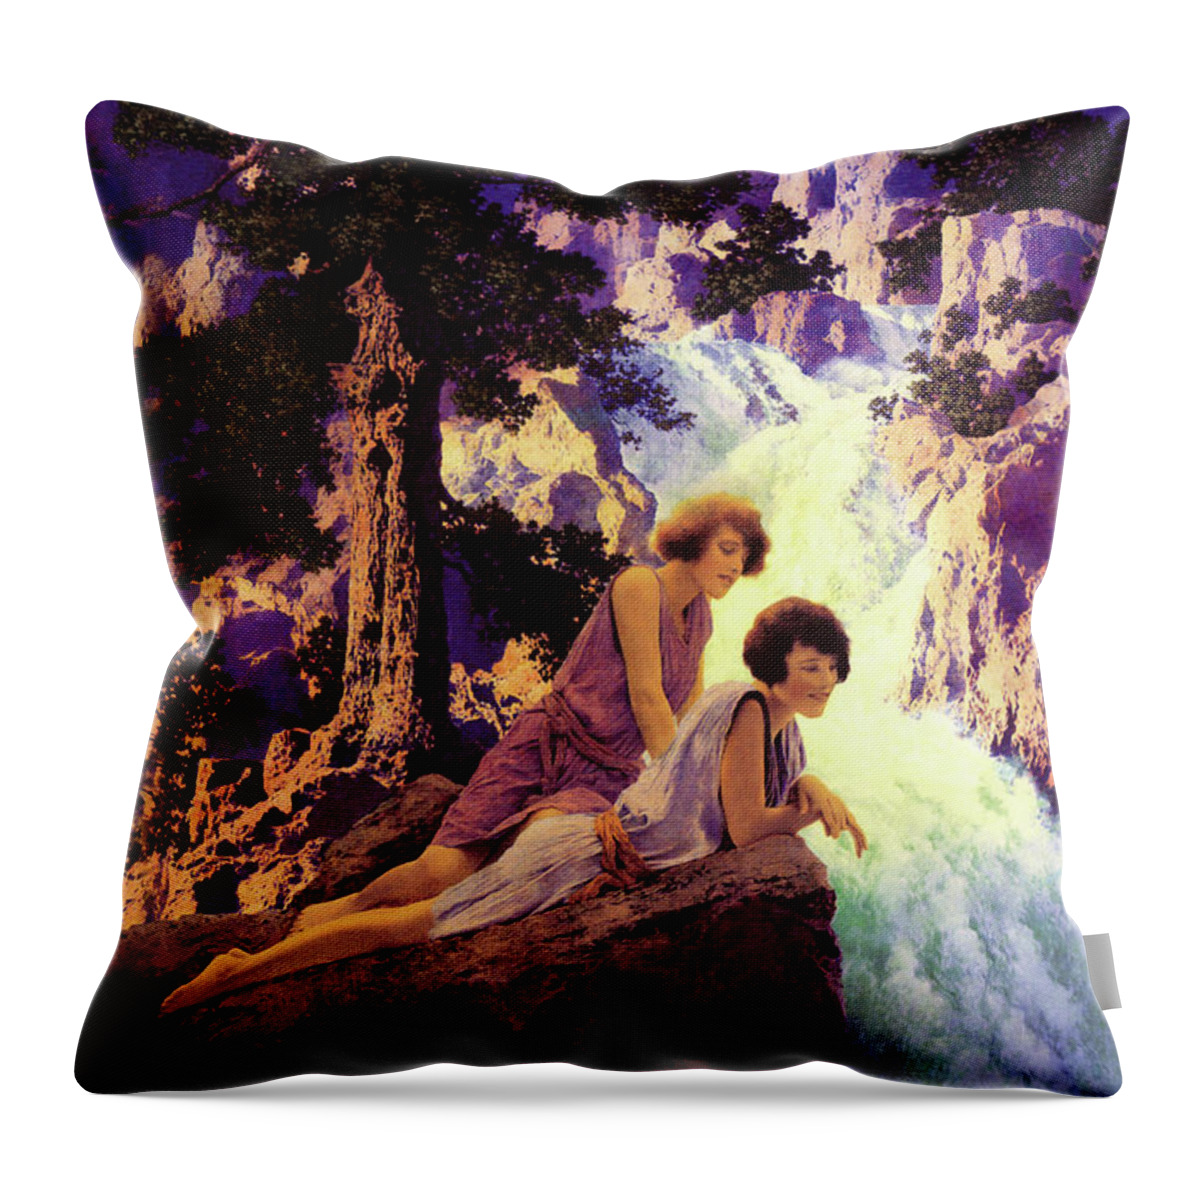 Waterfall Throw Pillow featuring the painting Waterfall by Maxfield Parrish